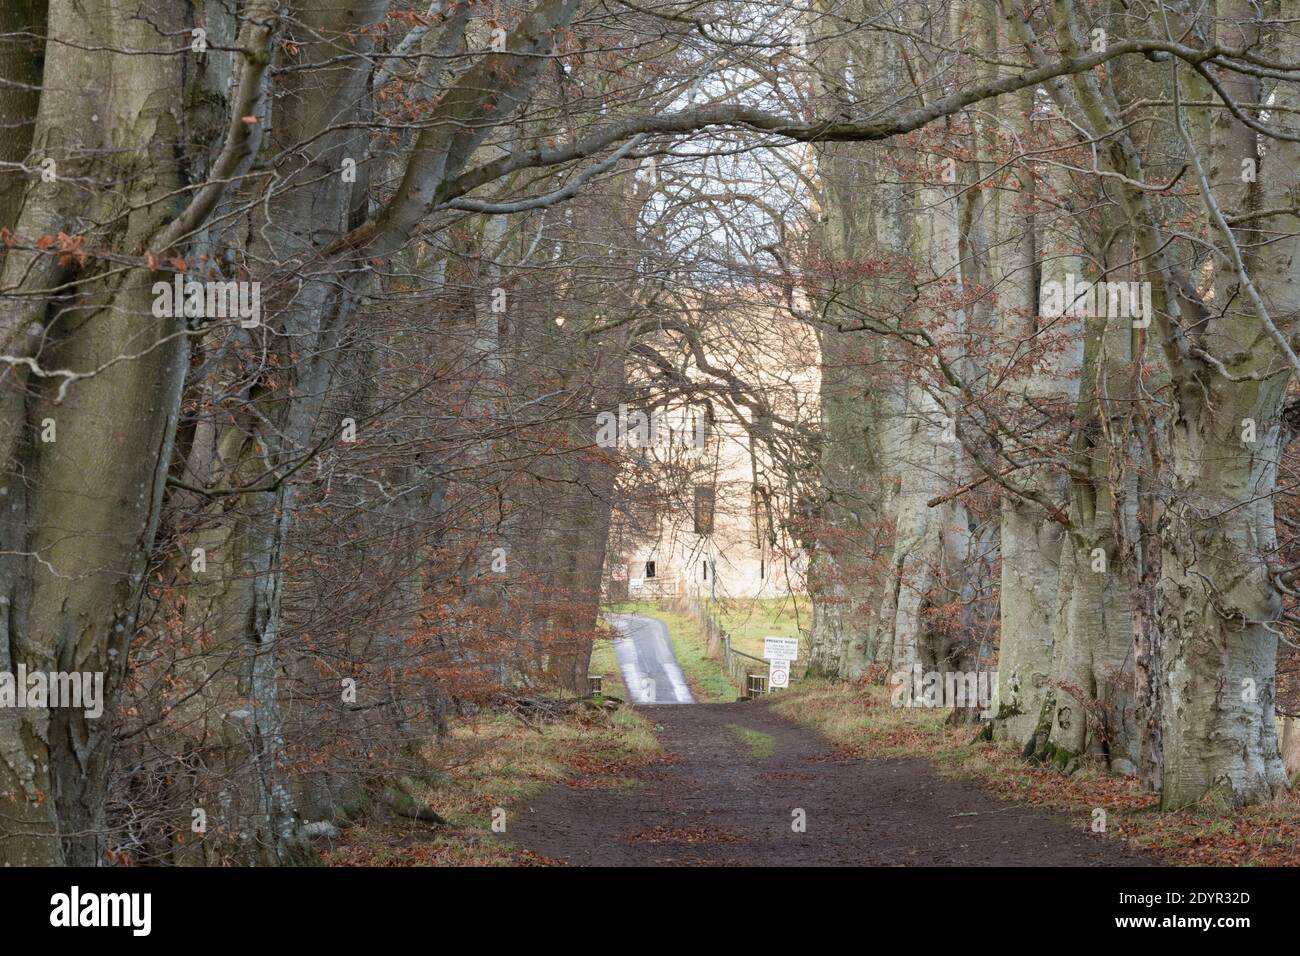 A View Along a Bridleway Between Lines of Beech Trees Looking Towards the Remains of the Bishop's Palace at Fetternear on an Overcast Morning Stock Photo